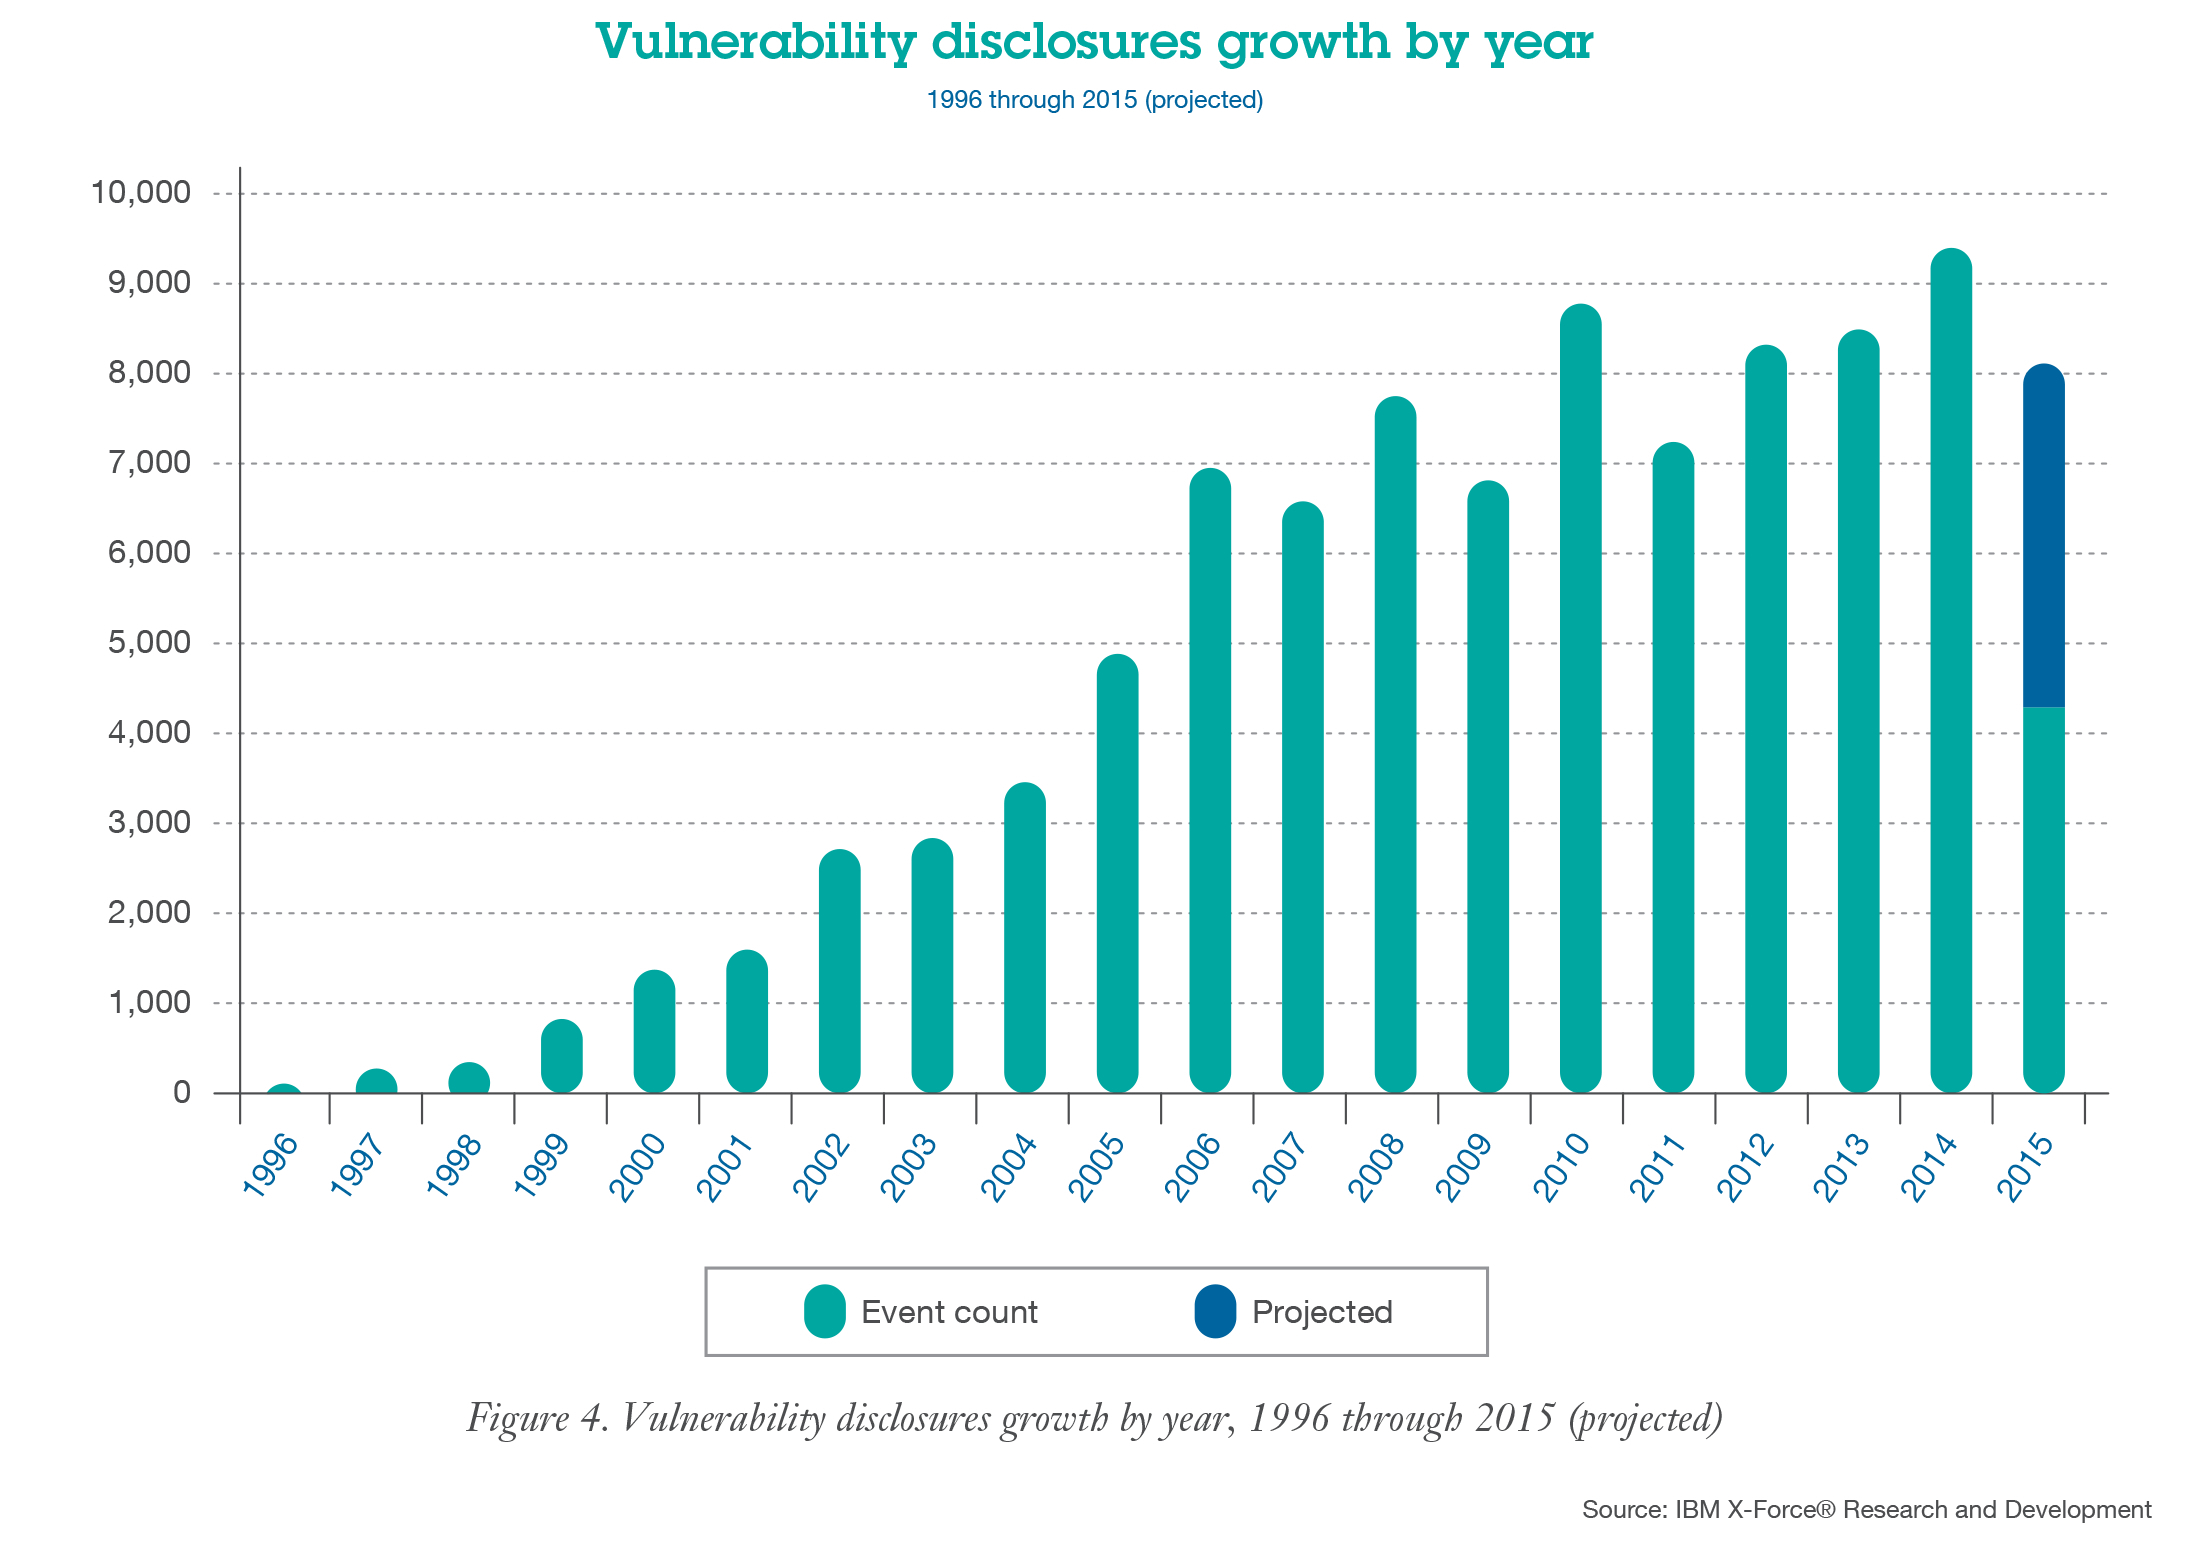 The total projected vulnerabilities for 2015 stands at about 8,000, the lowest total since 2011.